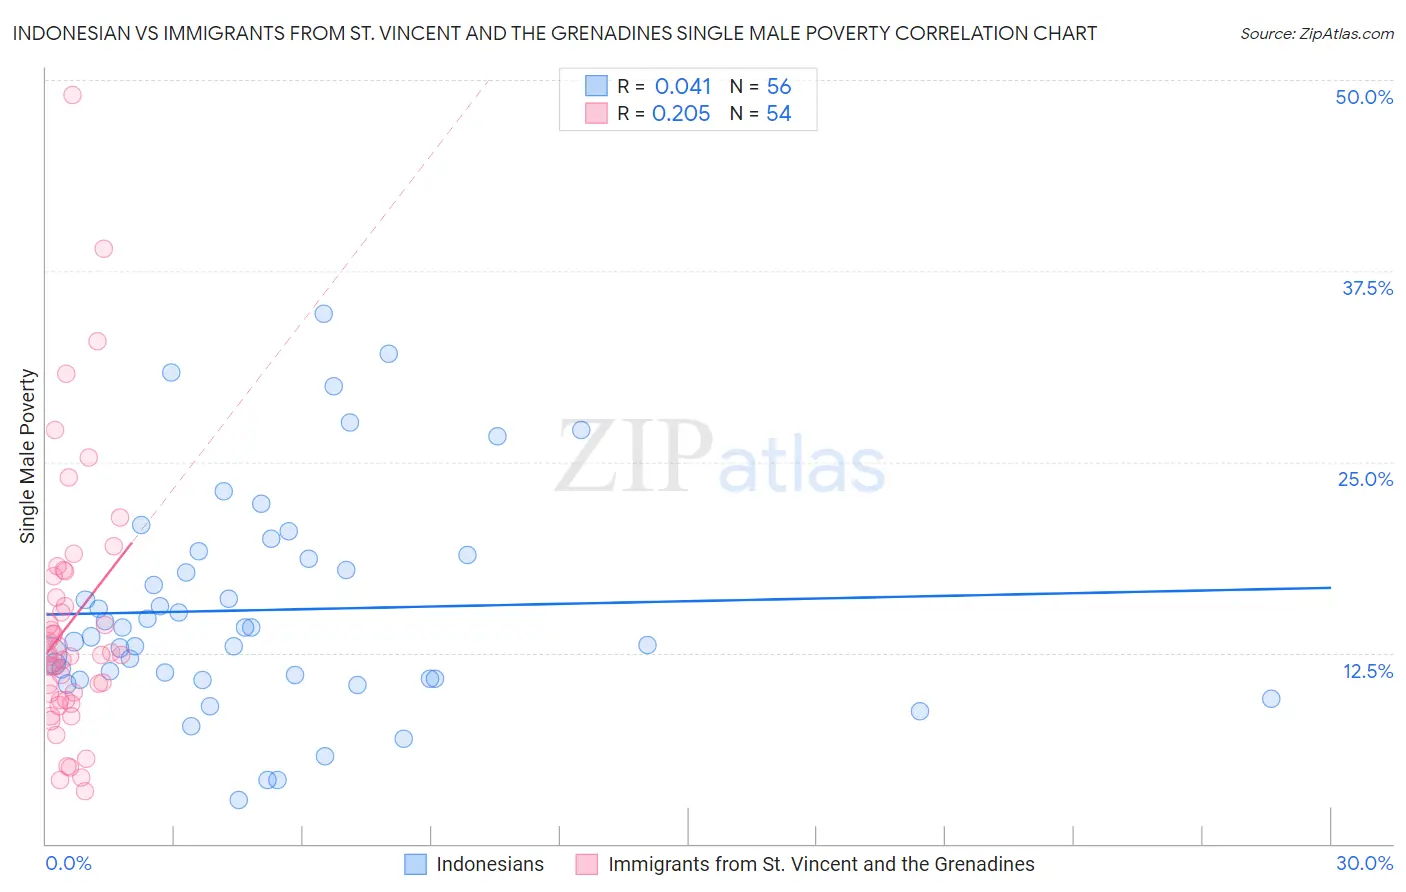 Indonesian vs Immigrants from St. Vincent and the Grenadines Single Male Poverty